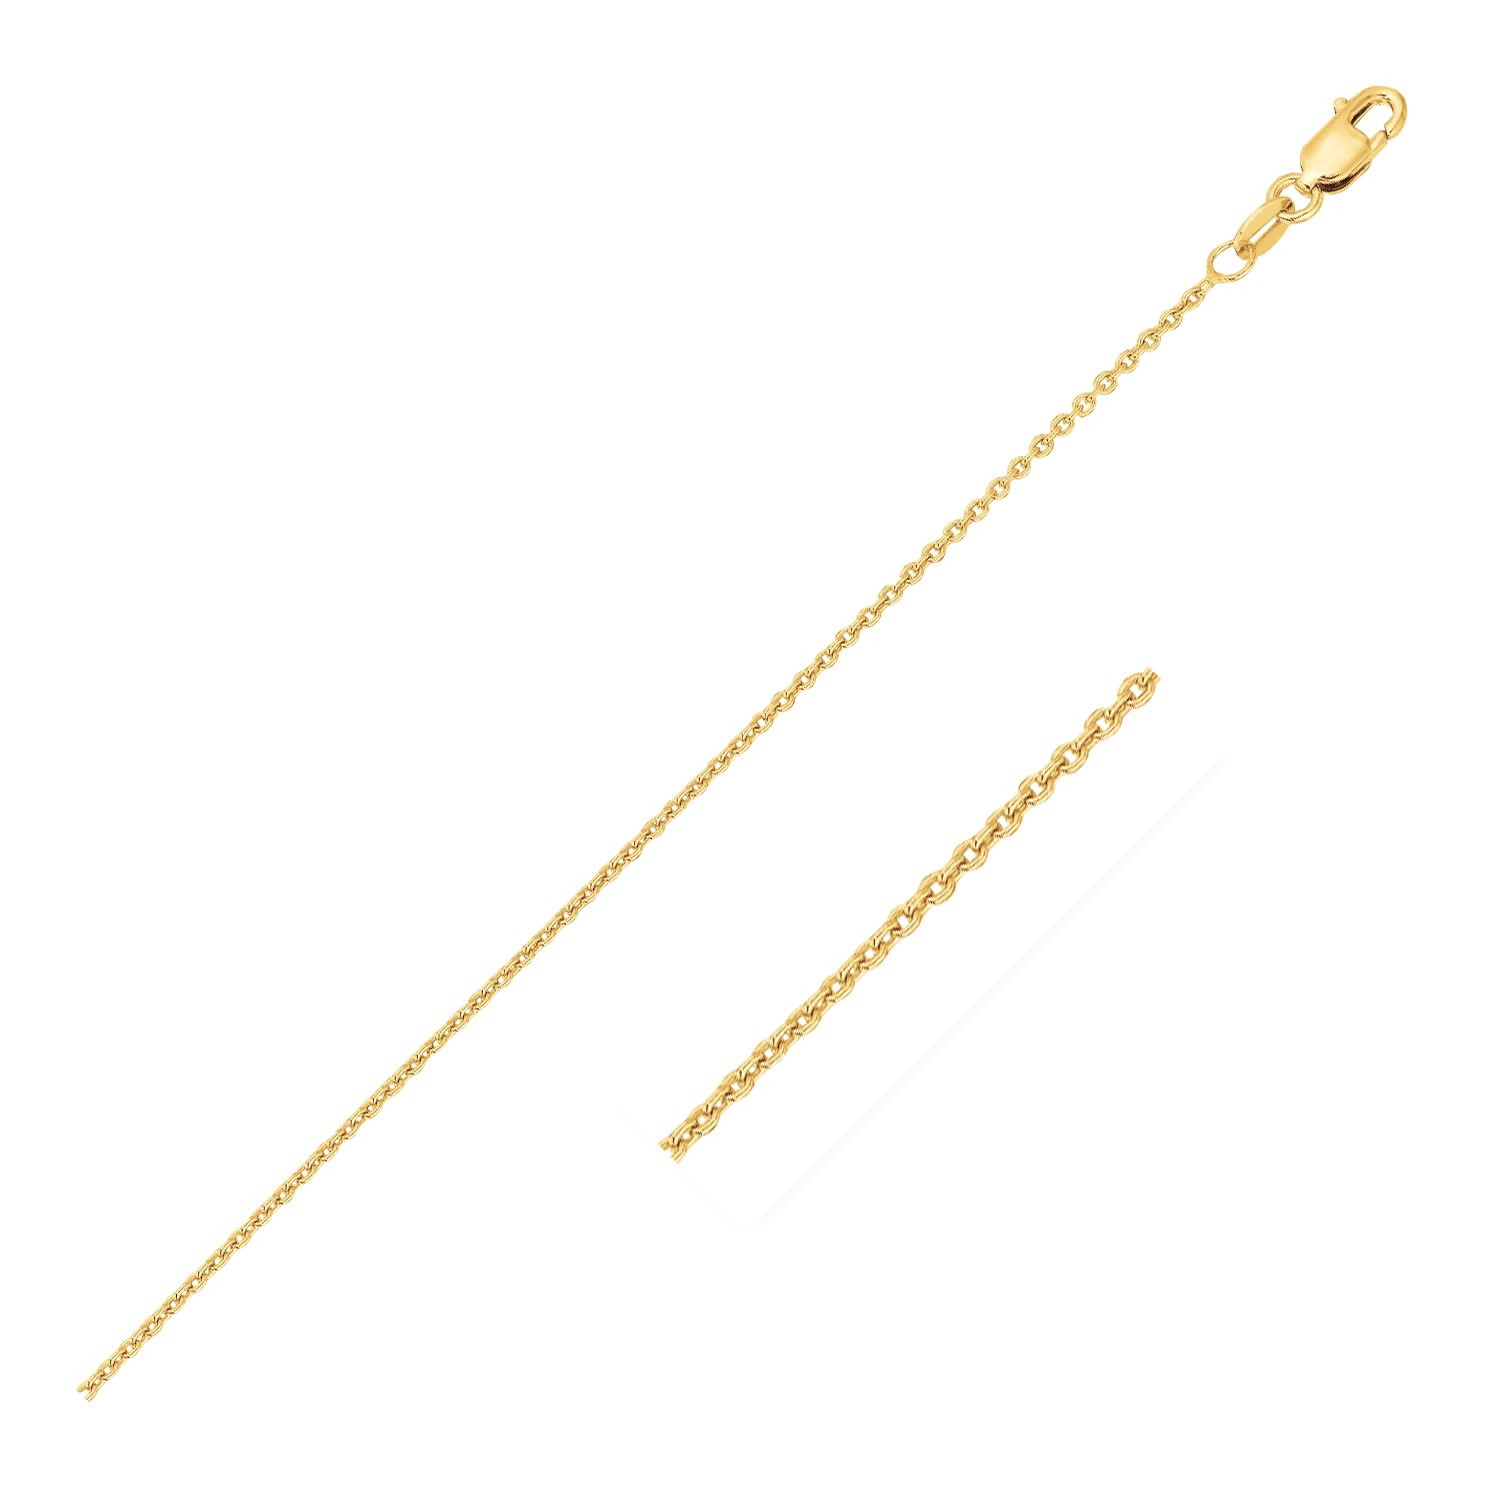 14k Yellow Gold Round Cable Link Chain 1.1mm Size 18 inches - image 1 of 4